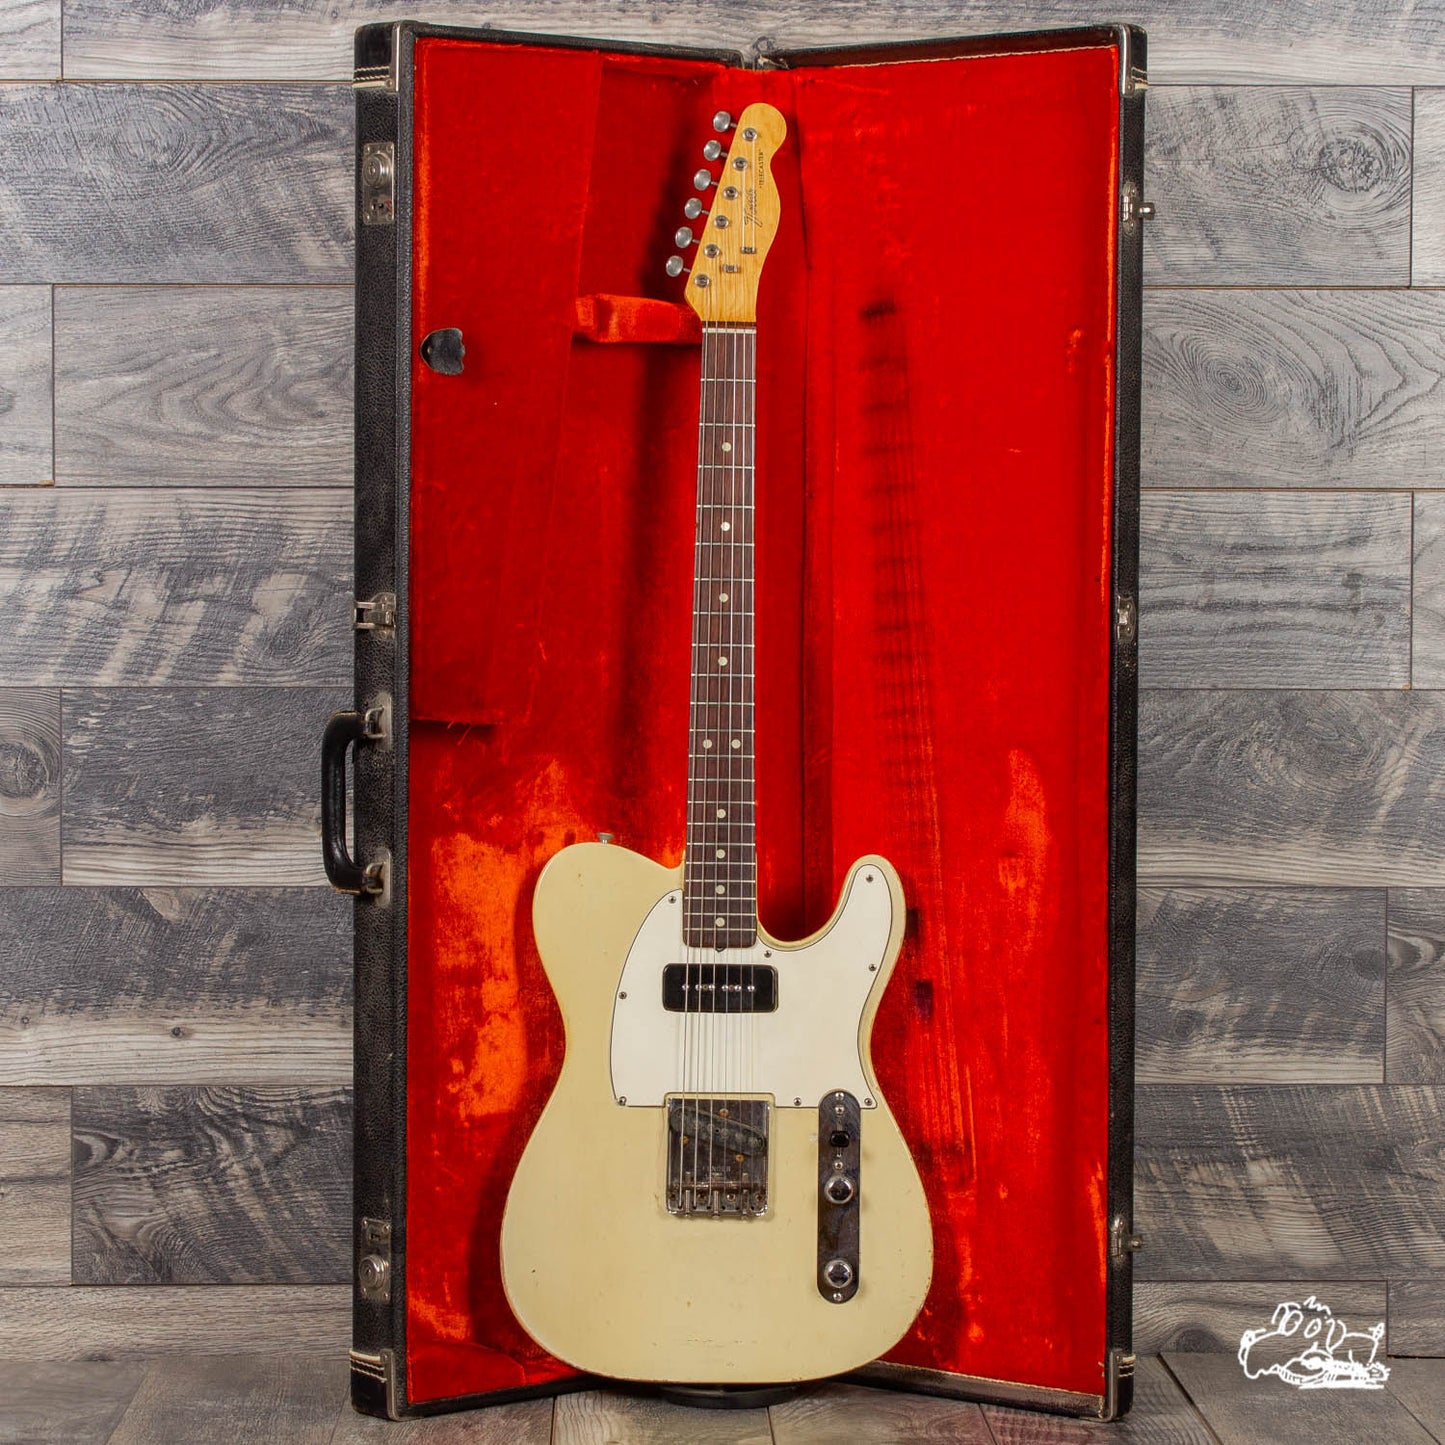 1966 Fender Telecaster - Blonde with '50s P-90